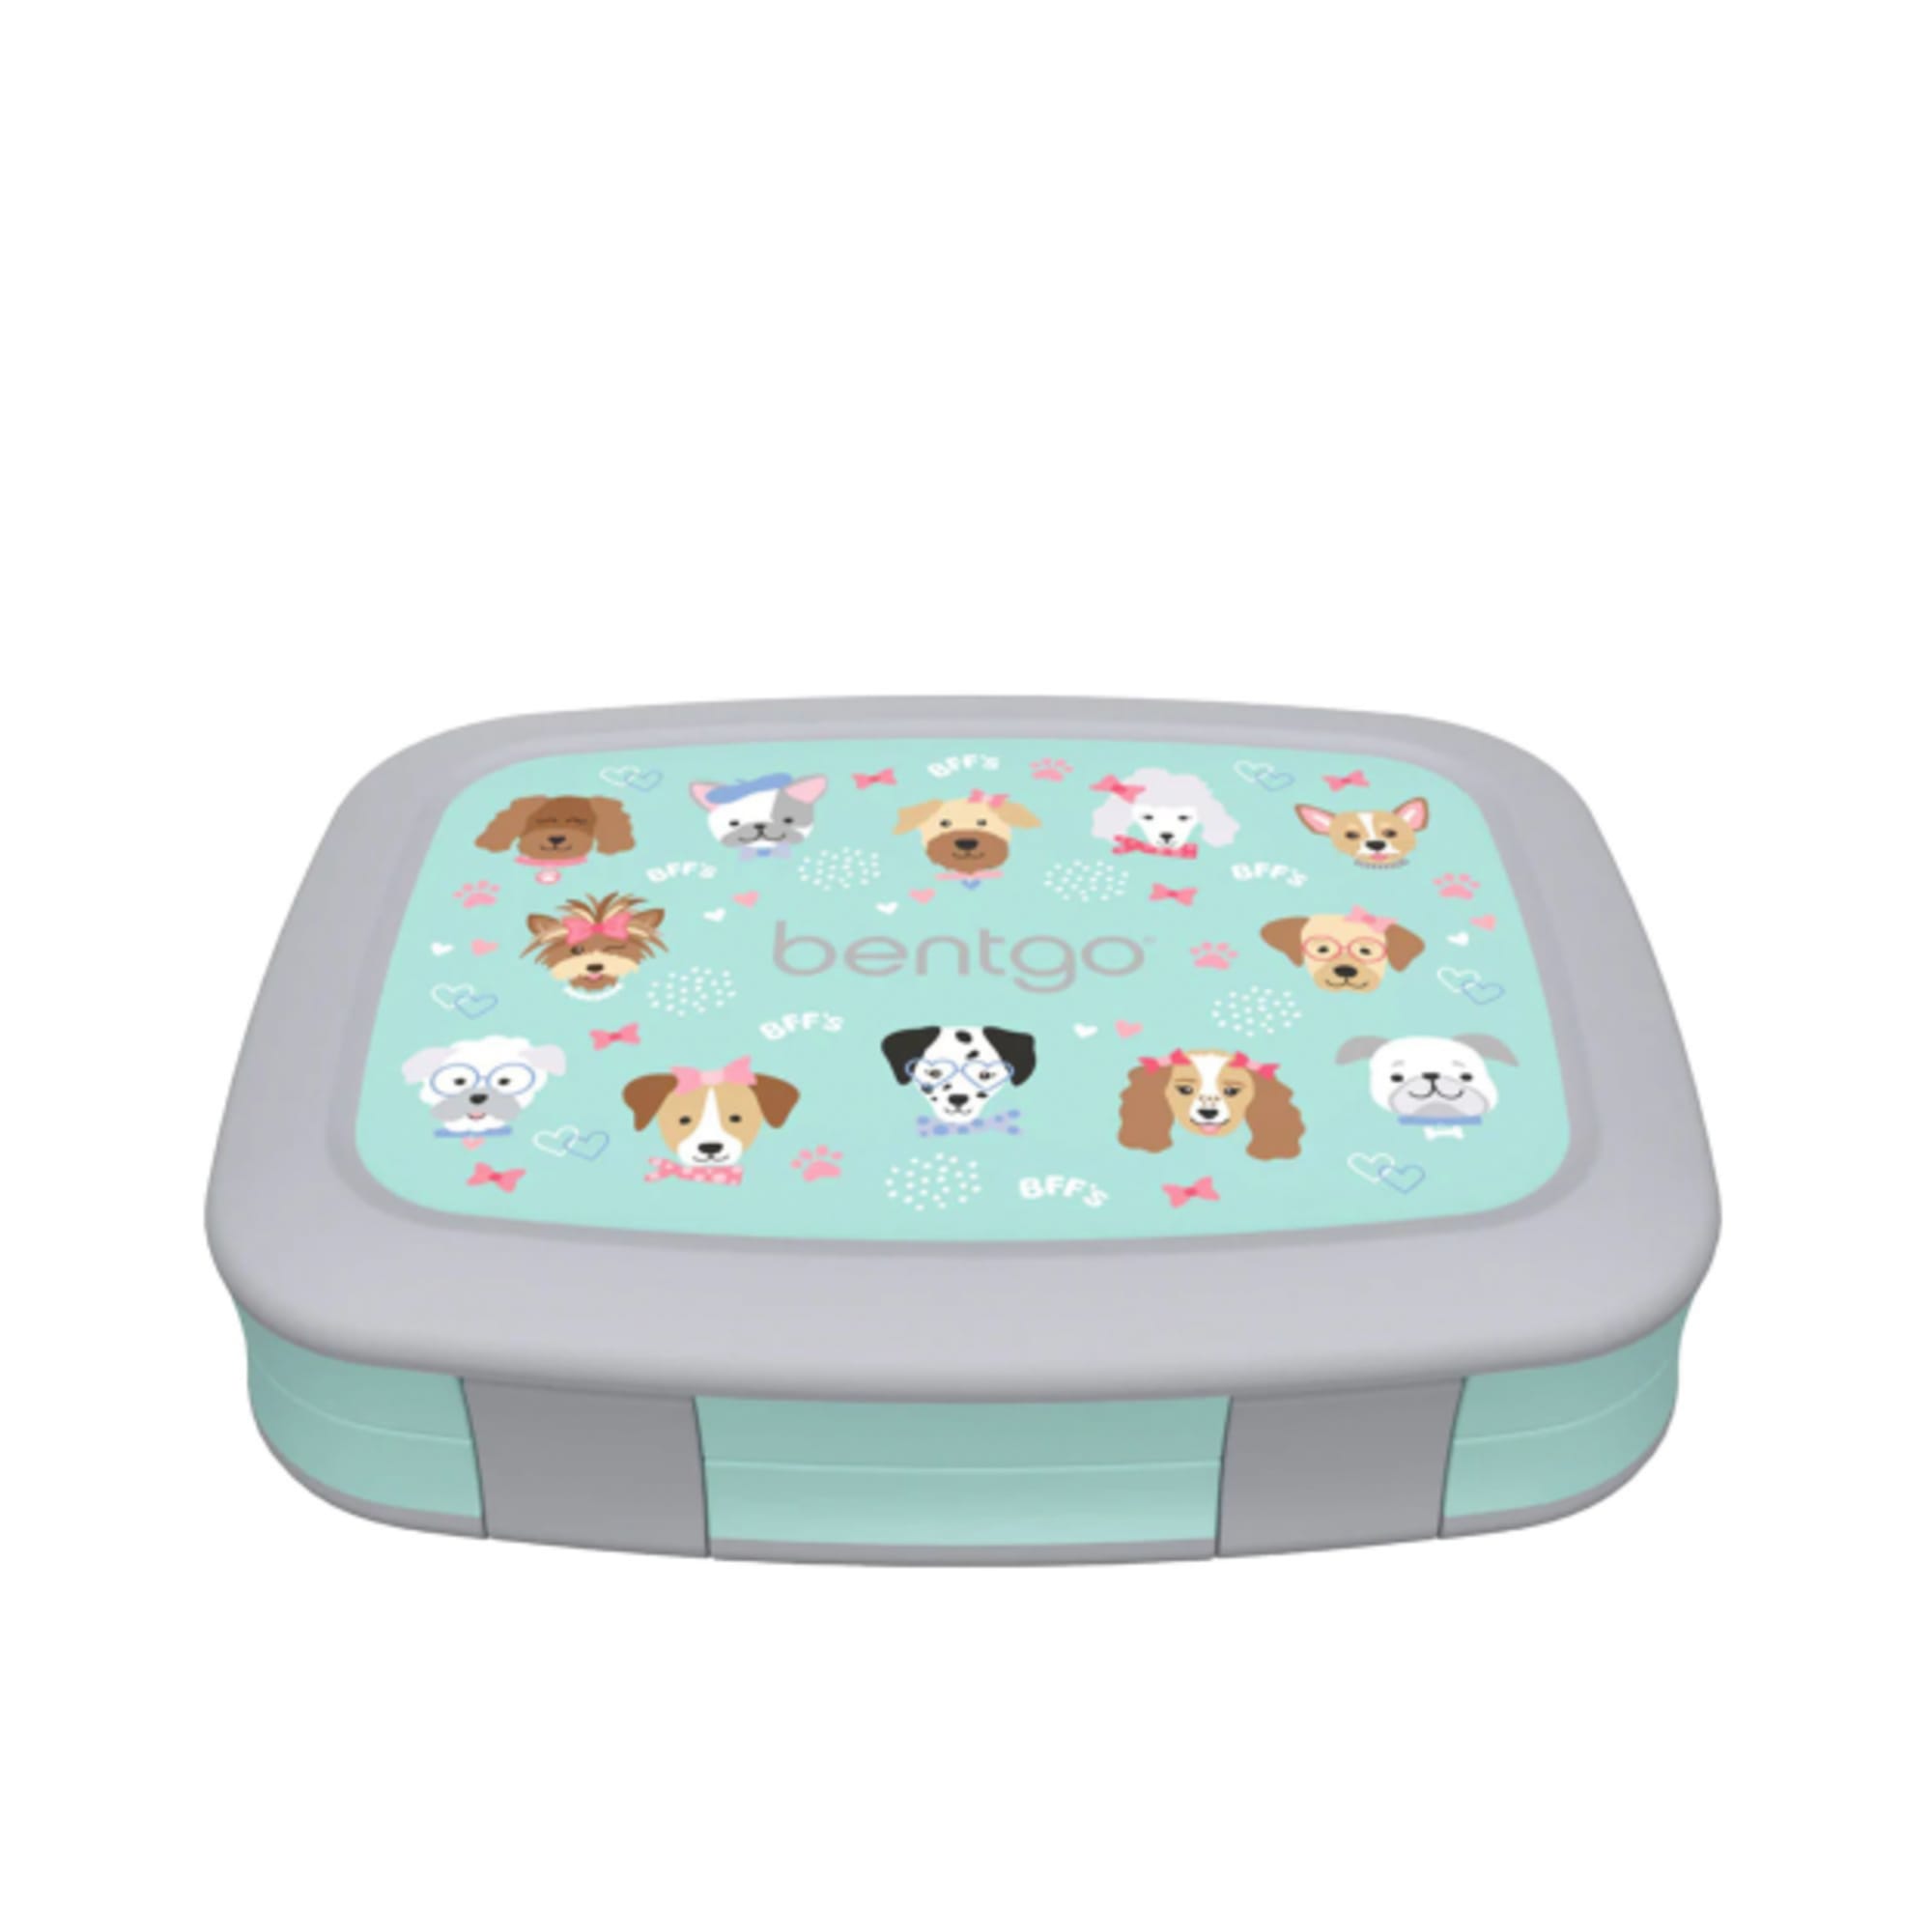 https://res.cloudinary.com/kitchenwarehouse/image/upload/c_fill,g_face,w_625/f_auto/t_PDP_2000x2000/Supplier%20Images%20/2000px/Bentgo-Kids-Leak-Proof-Bento-Box-Puppies_1_2000px.jpg